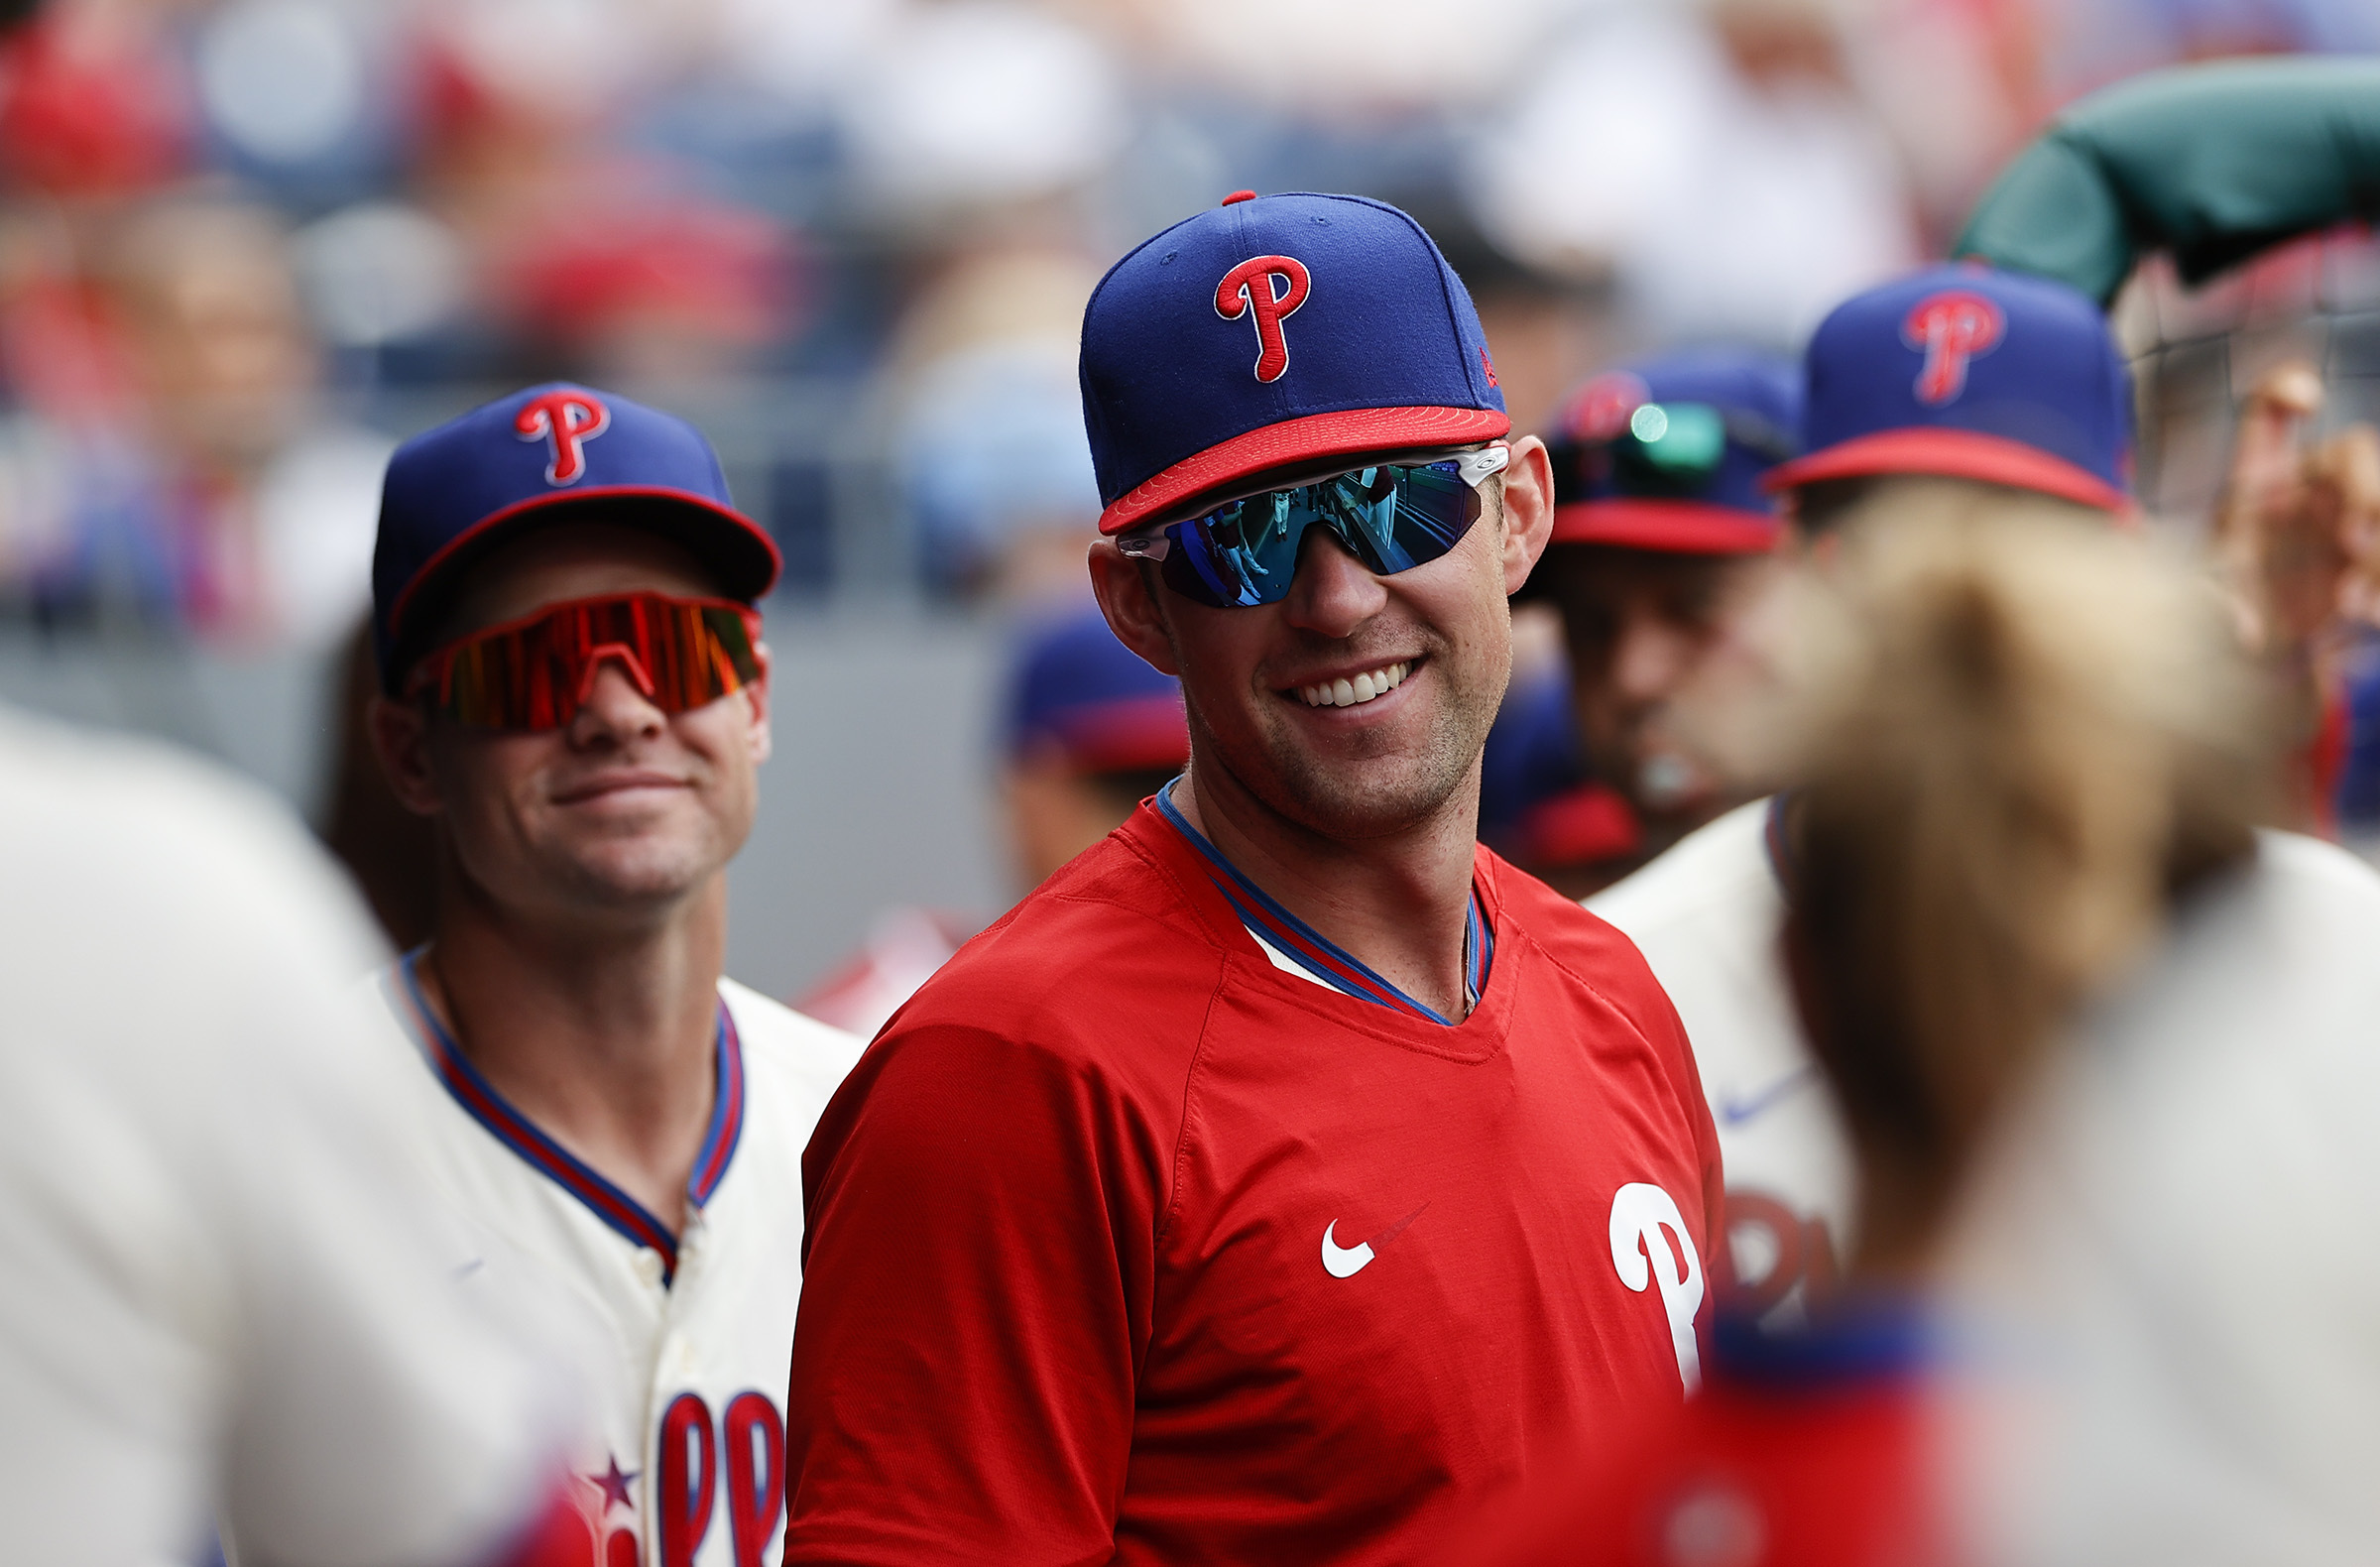 Rhys Hoskins injury: Alec Bohm, Miguel Sanó and more options for